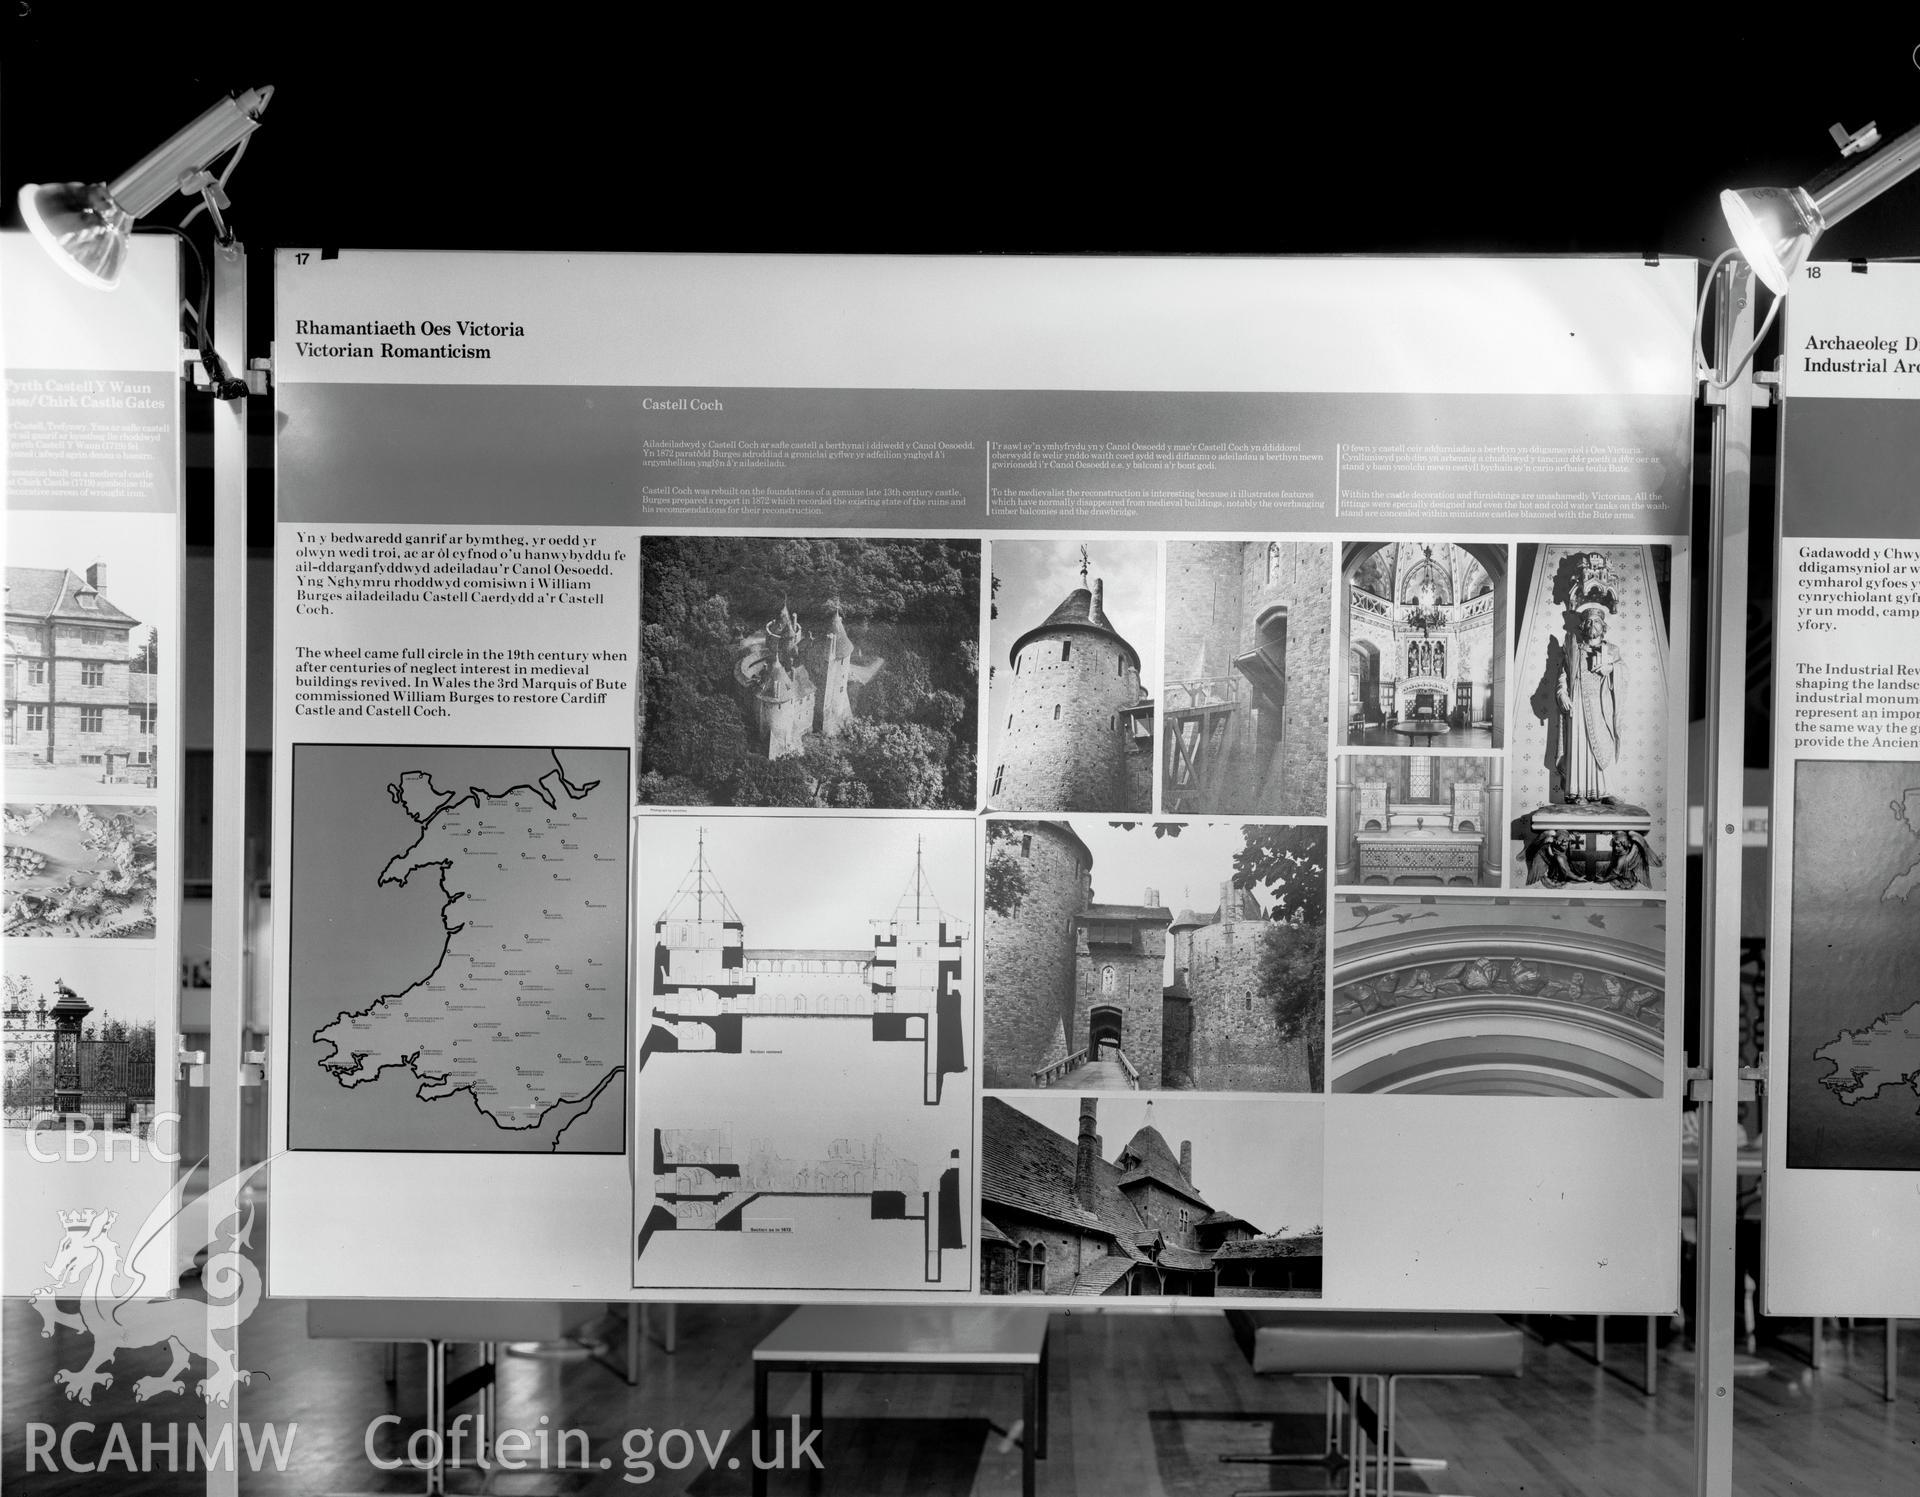 Digital copy of a black and white negative showing Ancient Monuments in Wales Exhibition, Aberystwyth. From Cadw Monuments in Care Collection.